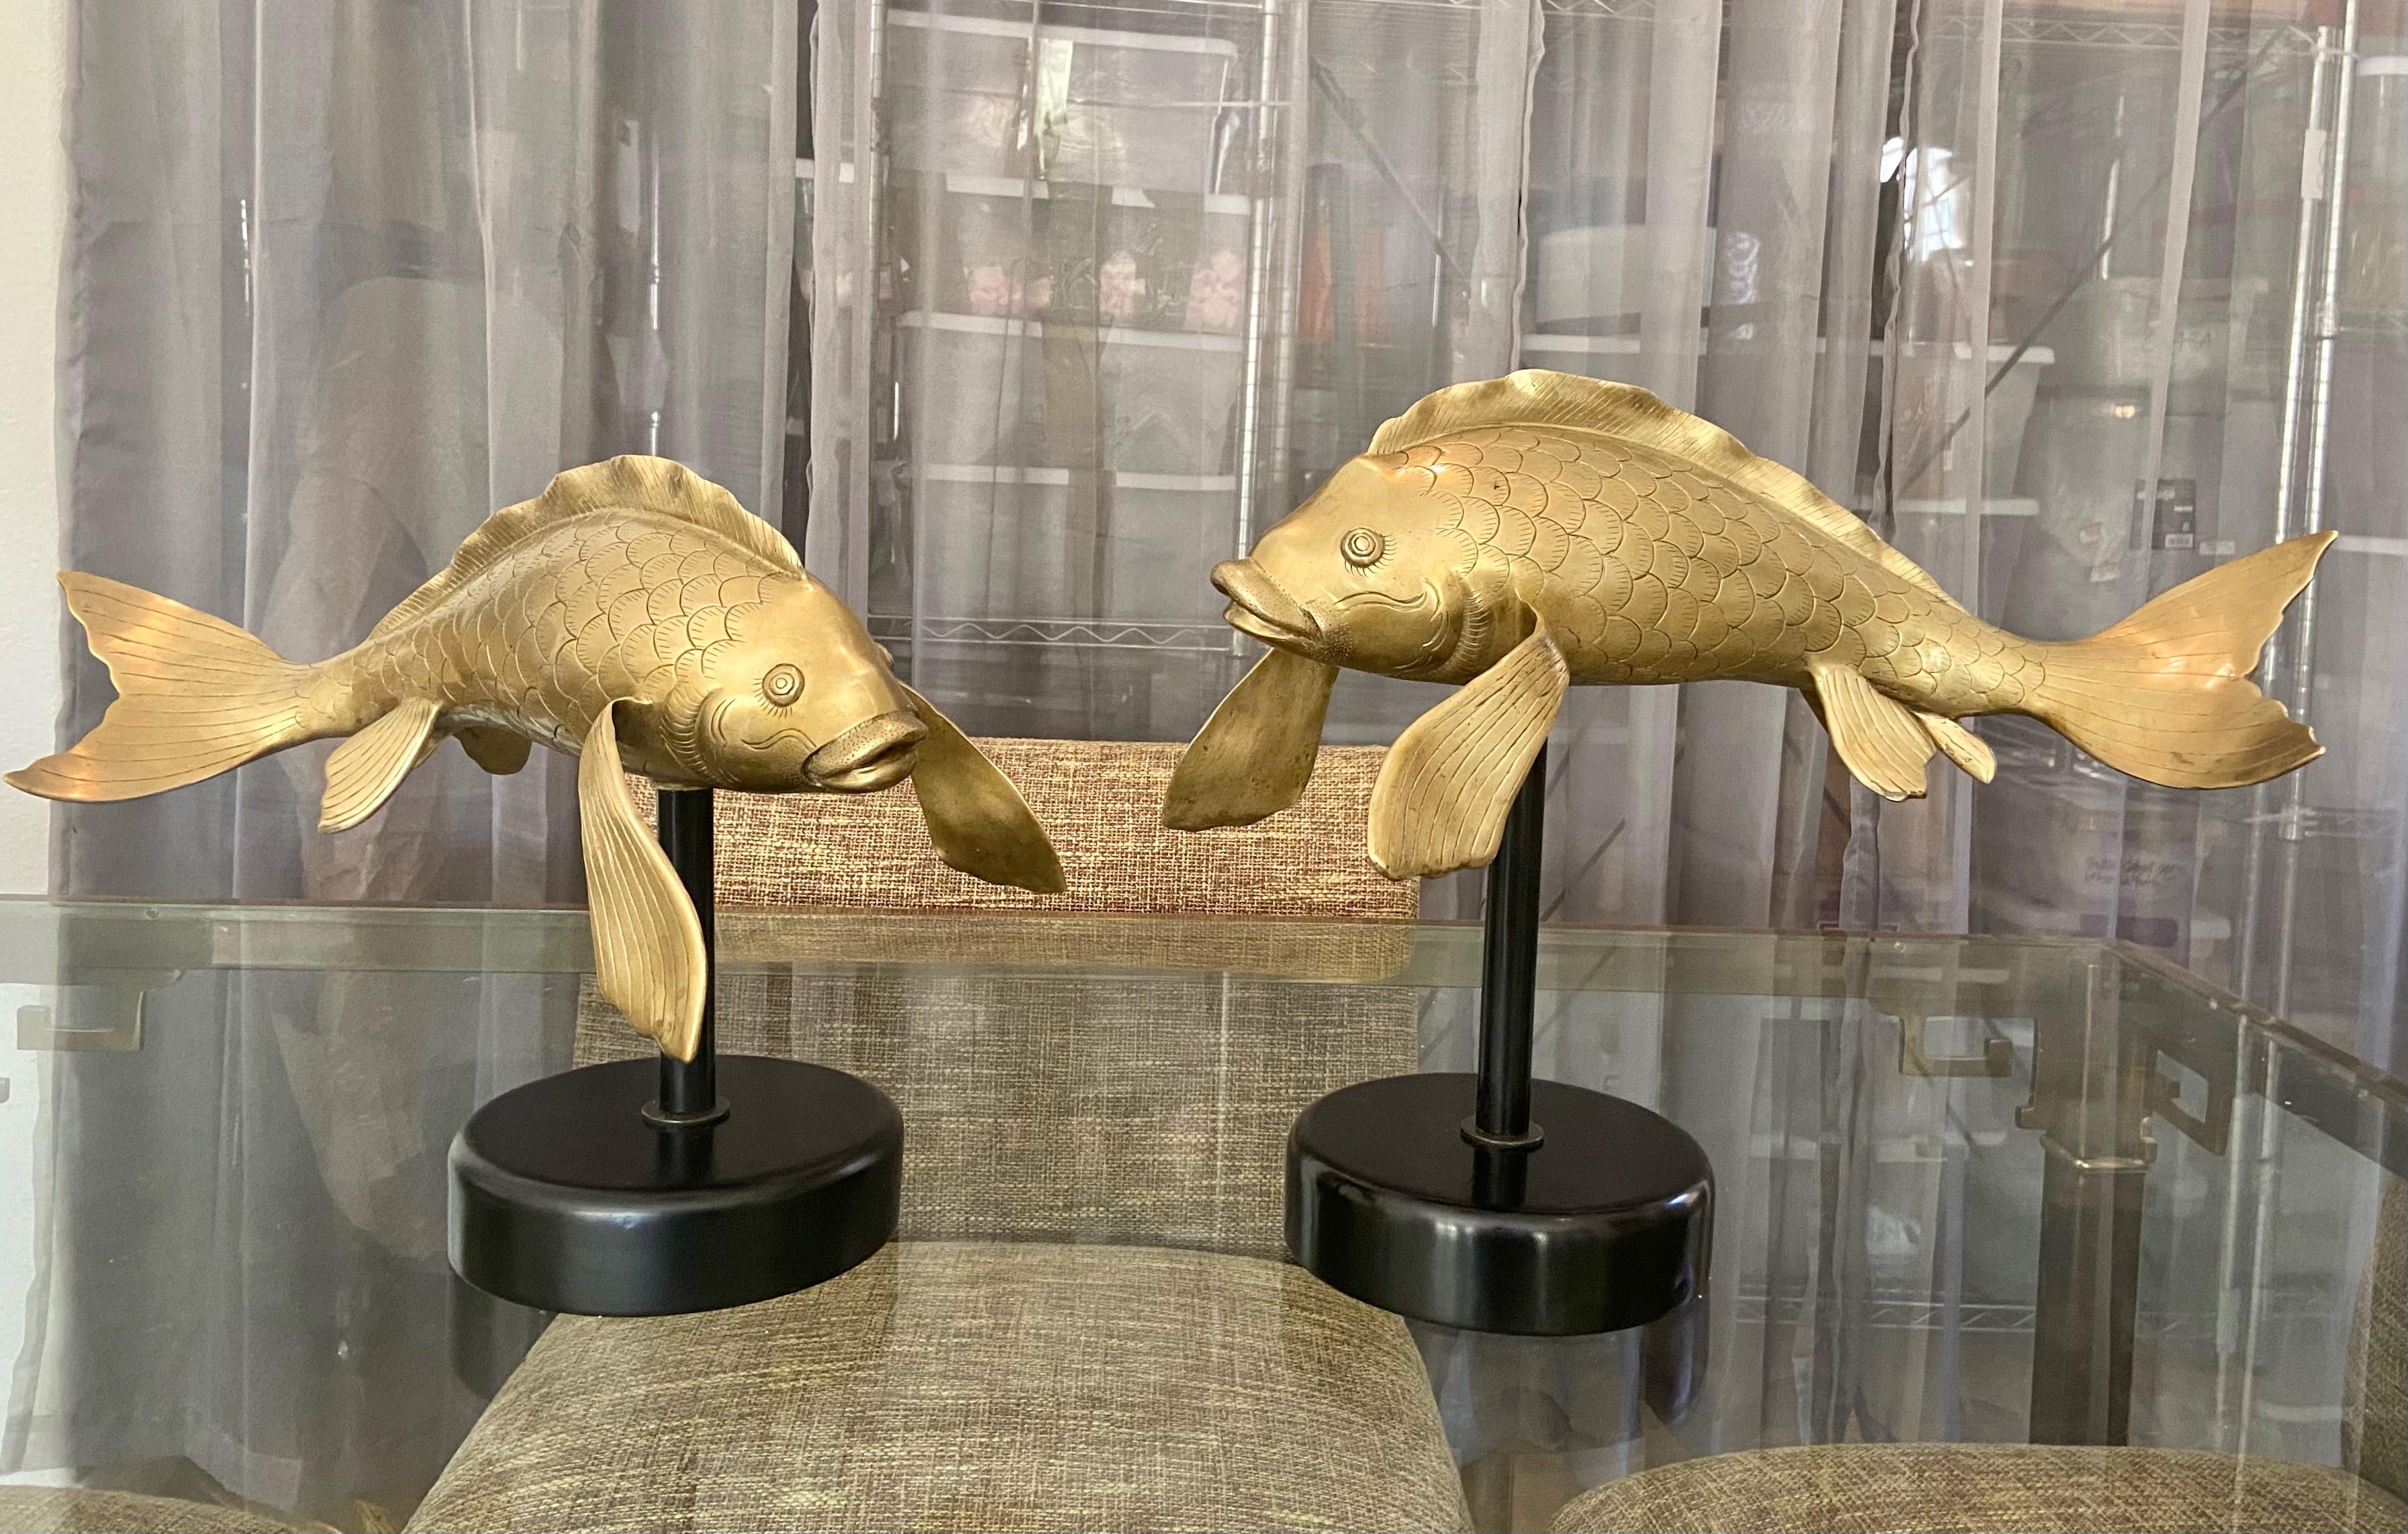 Pair of large Asian heavy cast brass koi fish sculptors newly mounted on black lacquered wood and metal bases. Each fish is finely crafted and sightly different in size. The bases are slightly different in height giving the impression they are